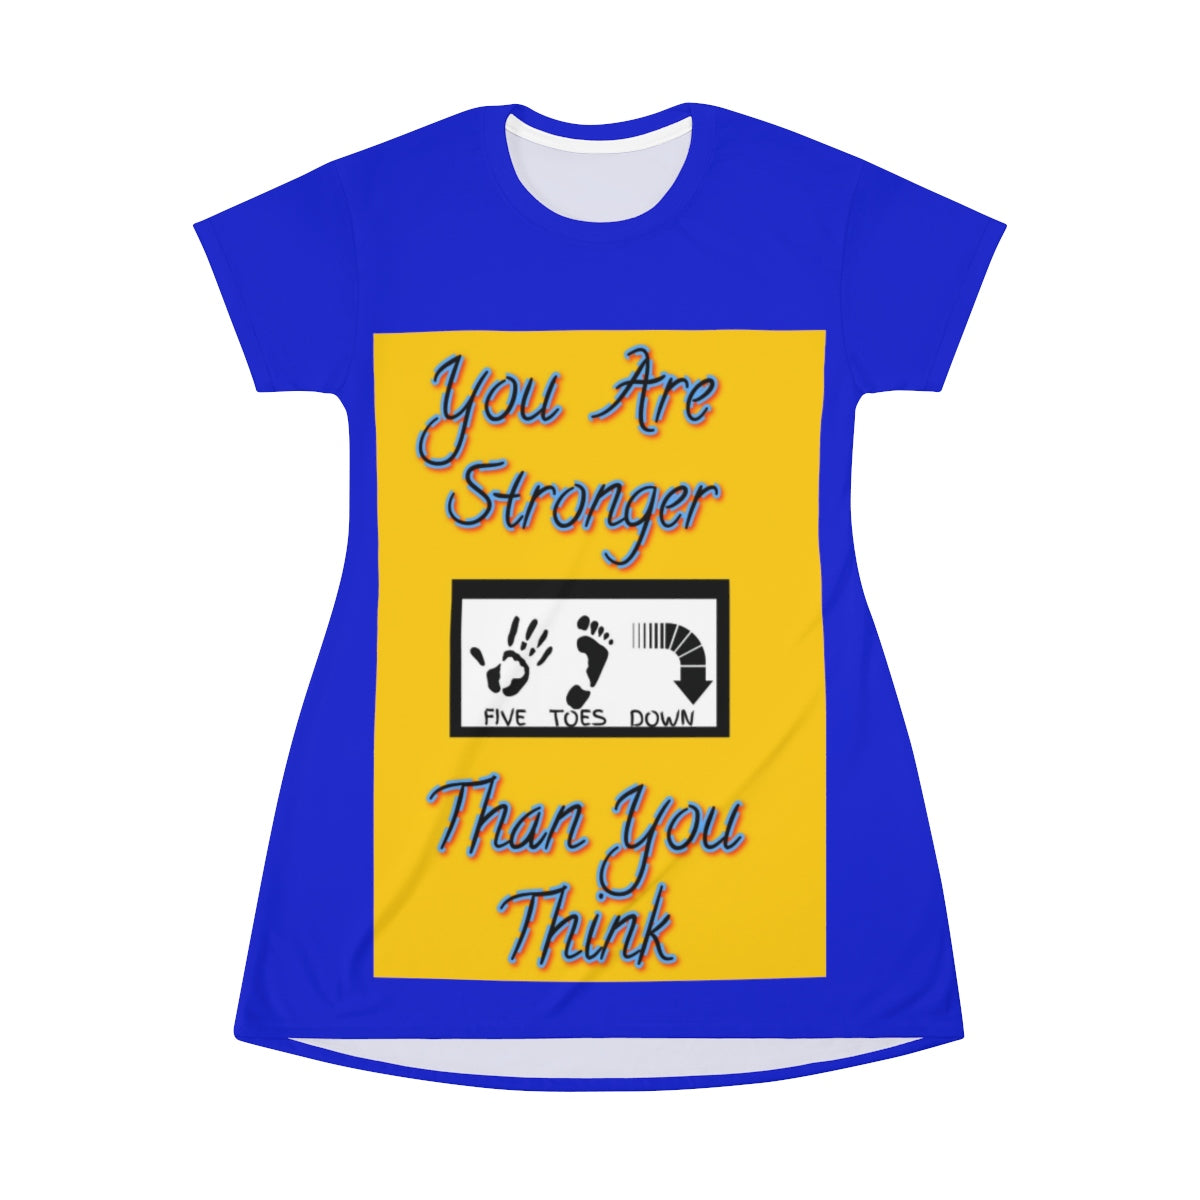 Five Toes Down You Are Stronger T-shirt Dress